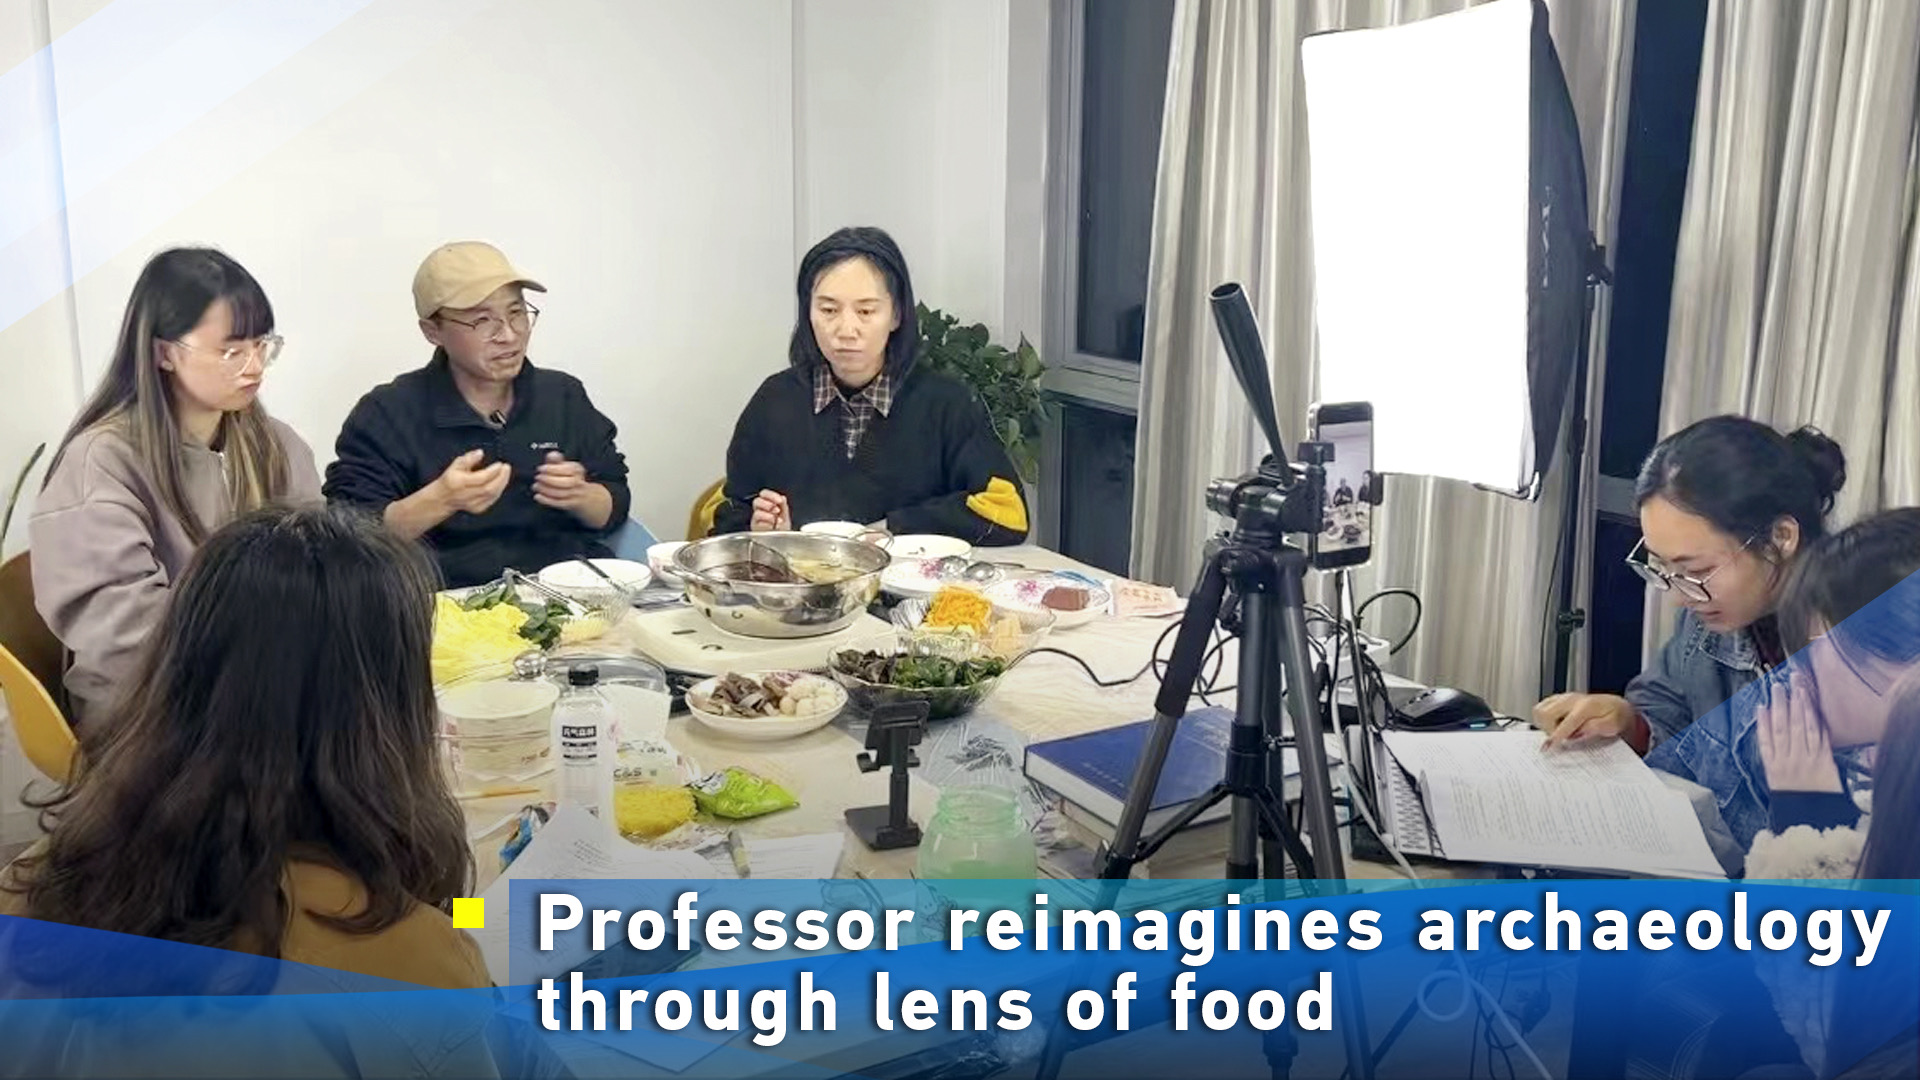 How an archaeology professor uses food vlogging to reimagine archaeology